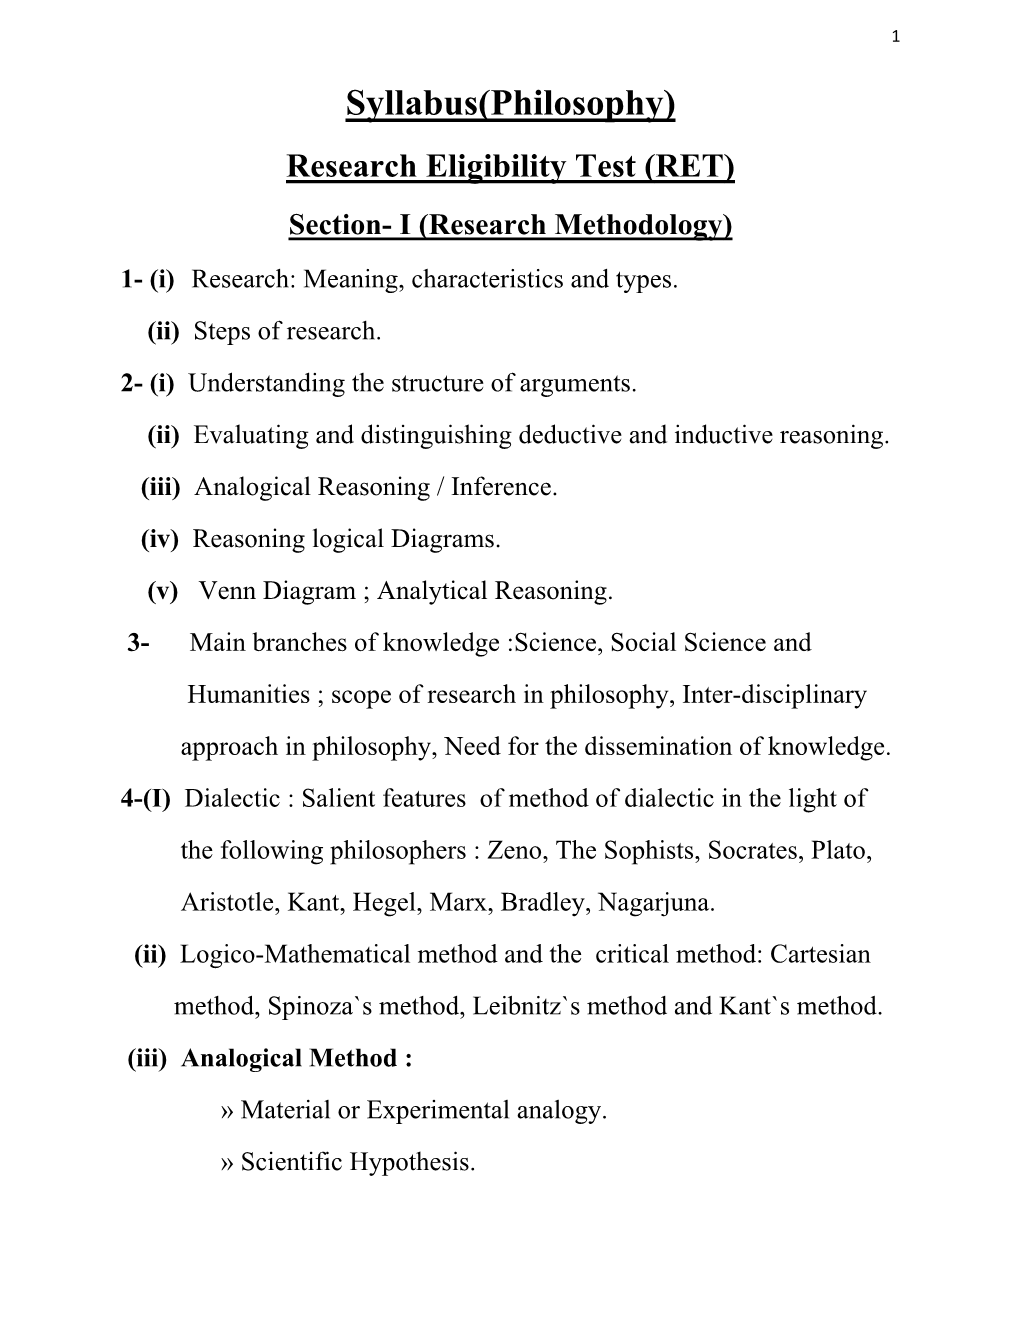 Syllabus(Philosophy) Research Eligibility Test (RET) Section- I (Research Methodology) 1- (I) Research: Meaning, Characteristics and Types